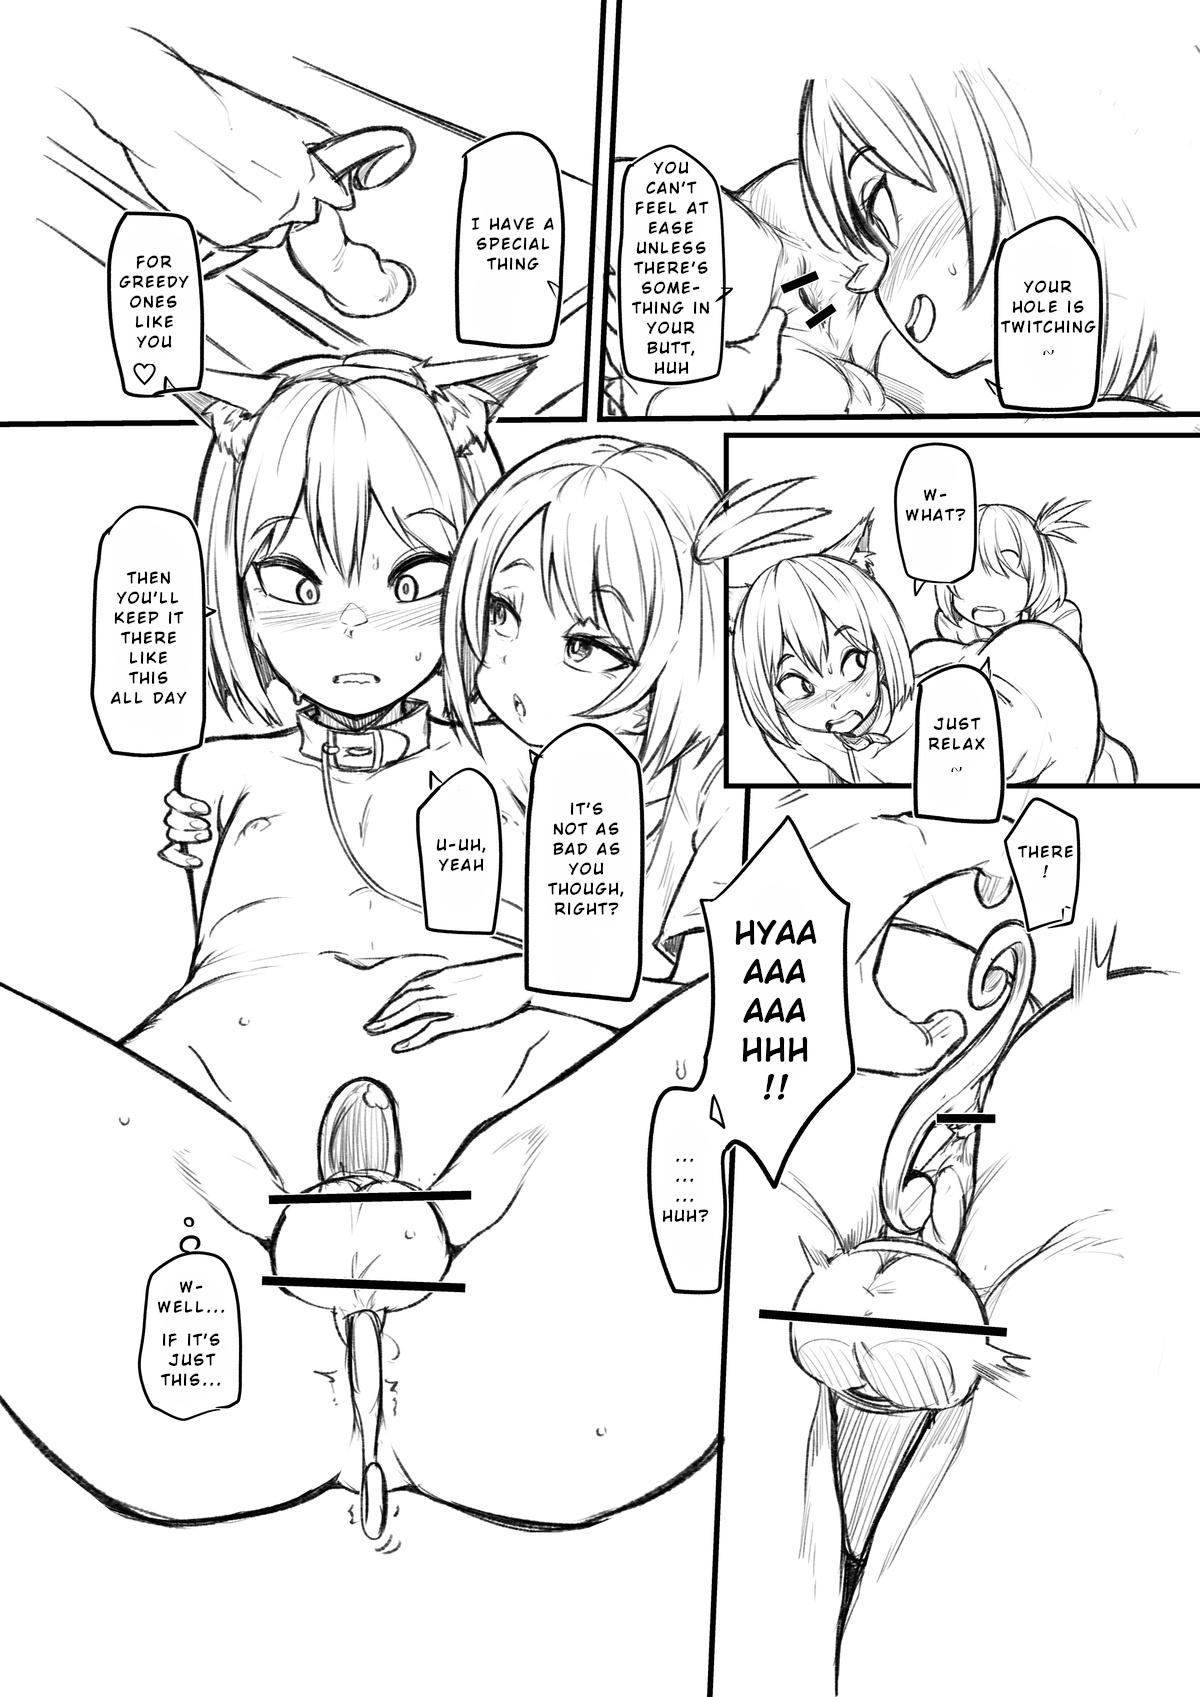 Stripping Boy trained by friend's Sister - Original Lolicon - Page 9